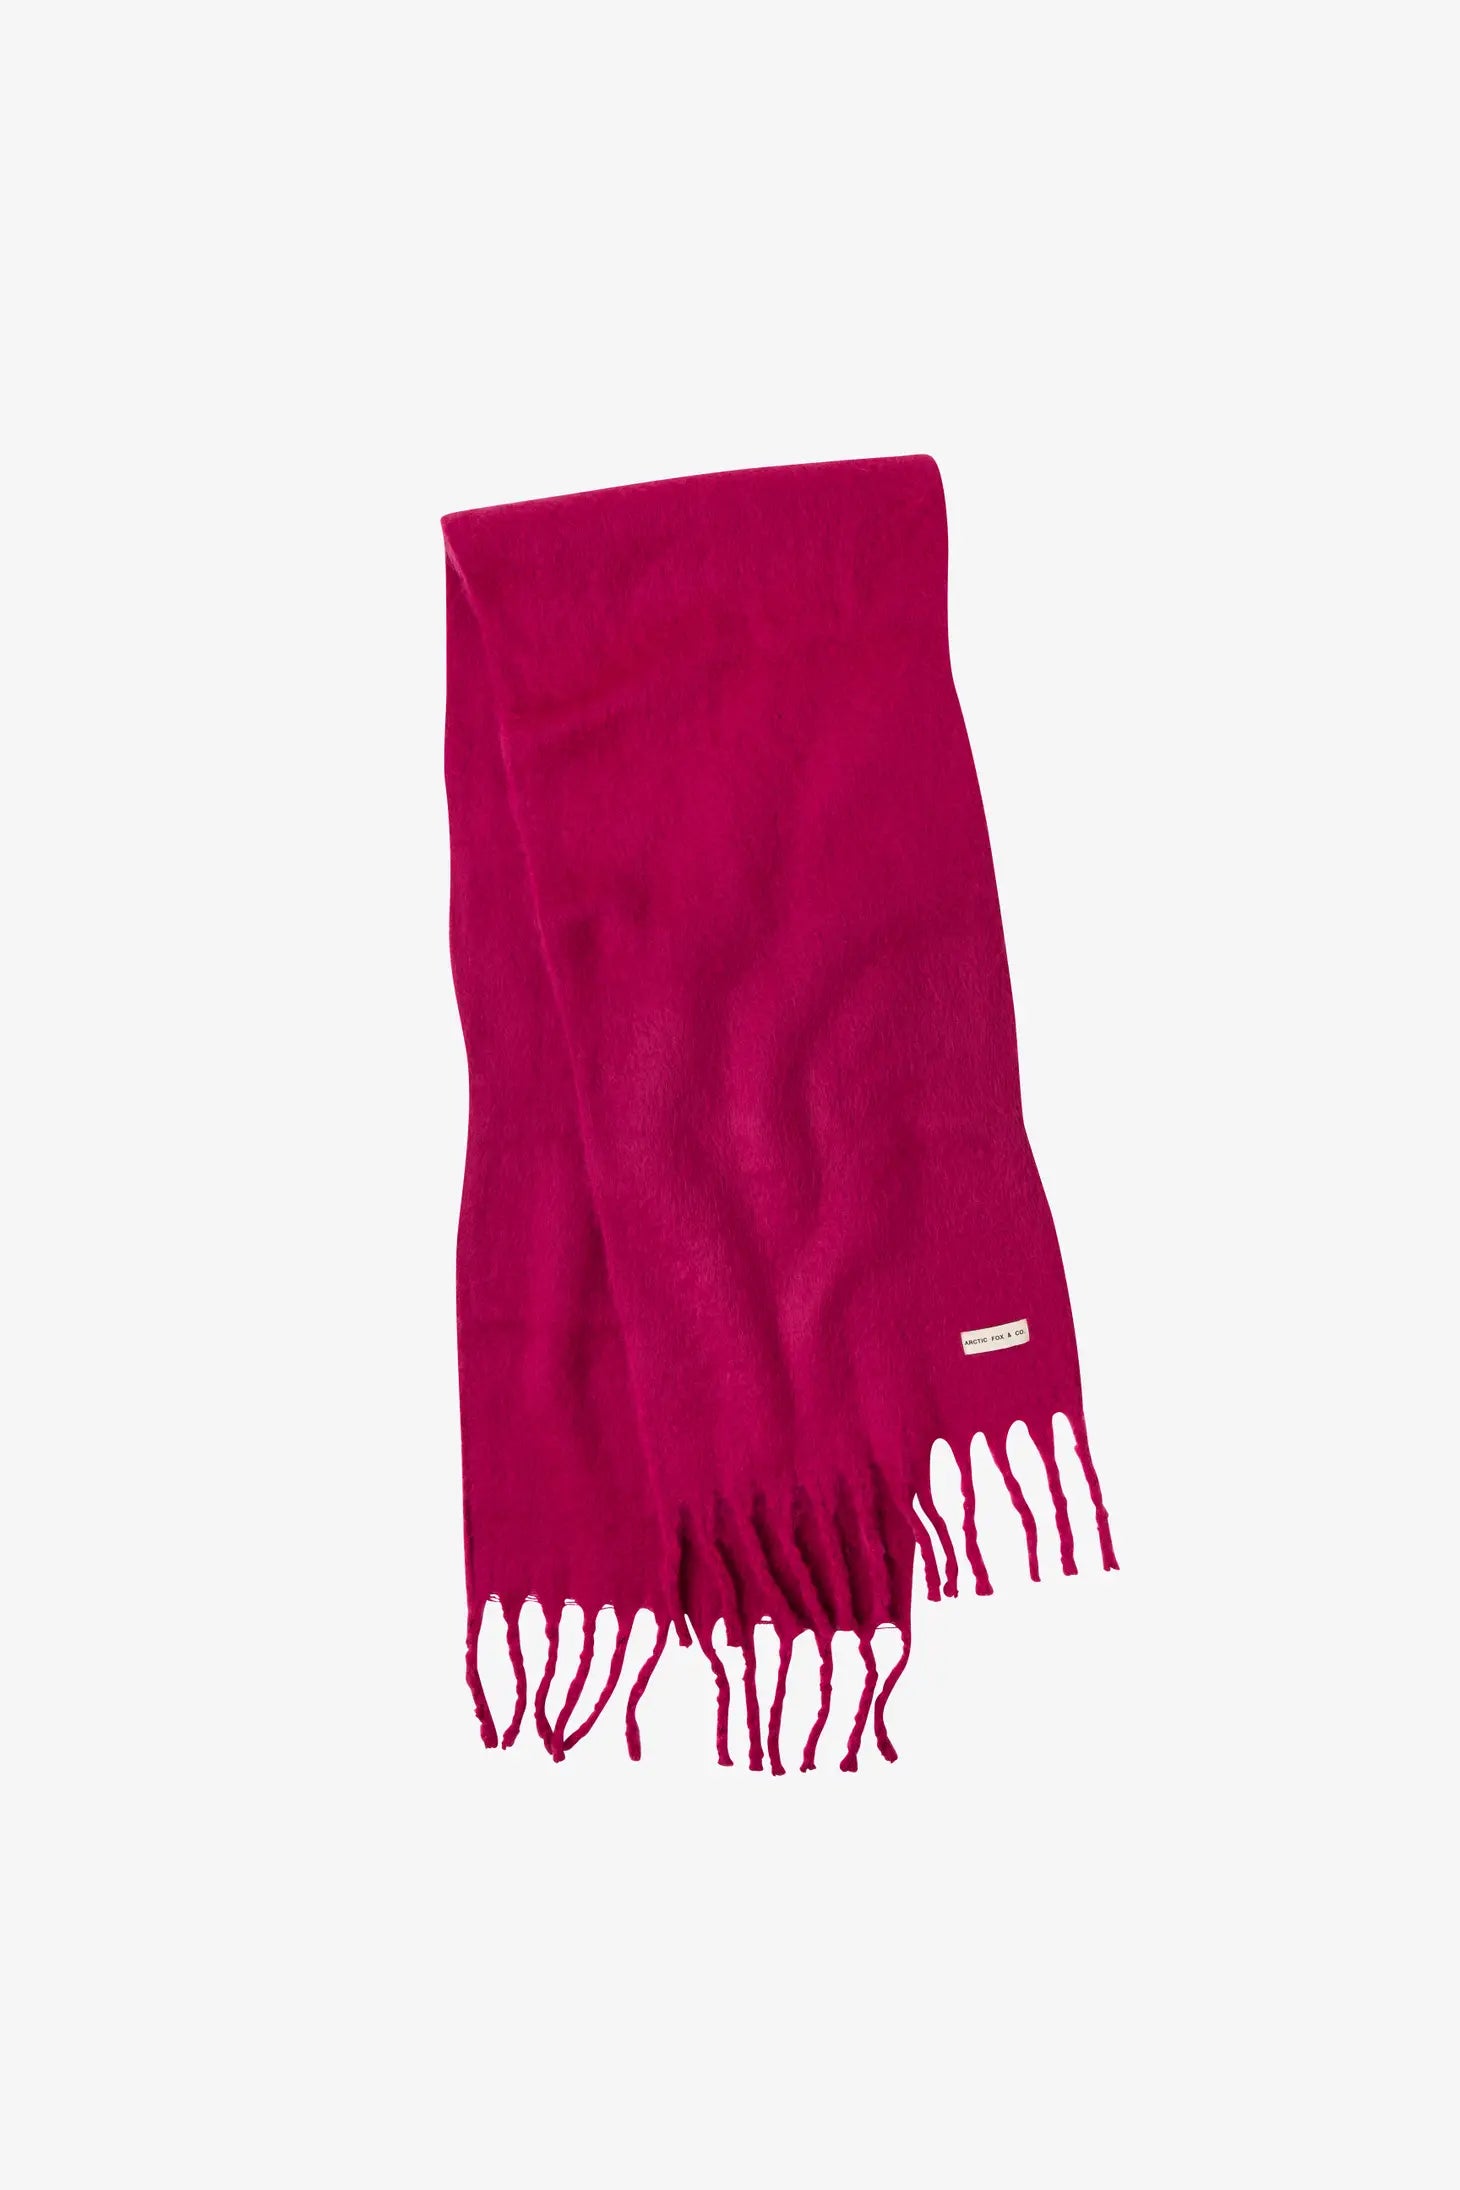 Curate - Arctic Fox & Co. The Reykjavik Scarf - Sustainable Fashion Black Sands